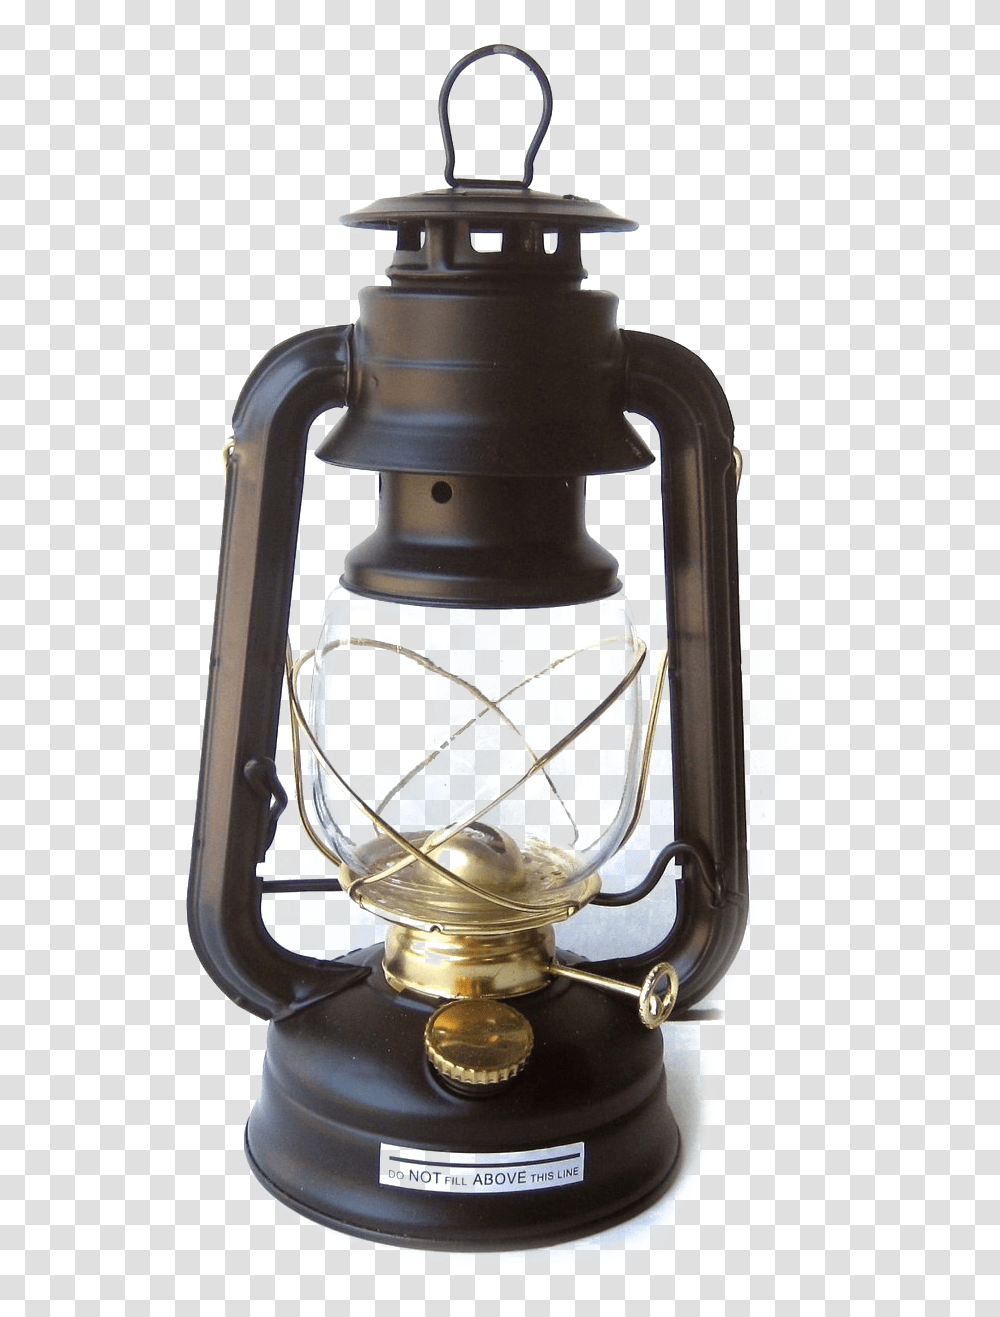 Lantern Pic, Lamp, Fire Hydrant, Mixer, Appliance Transparent Png